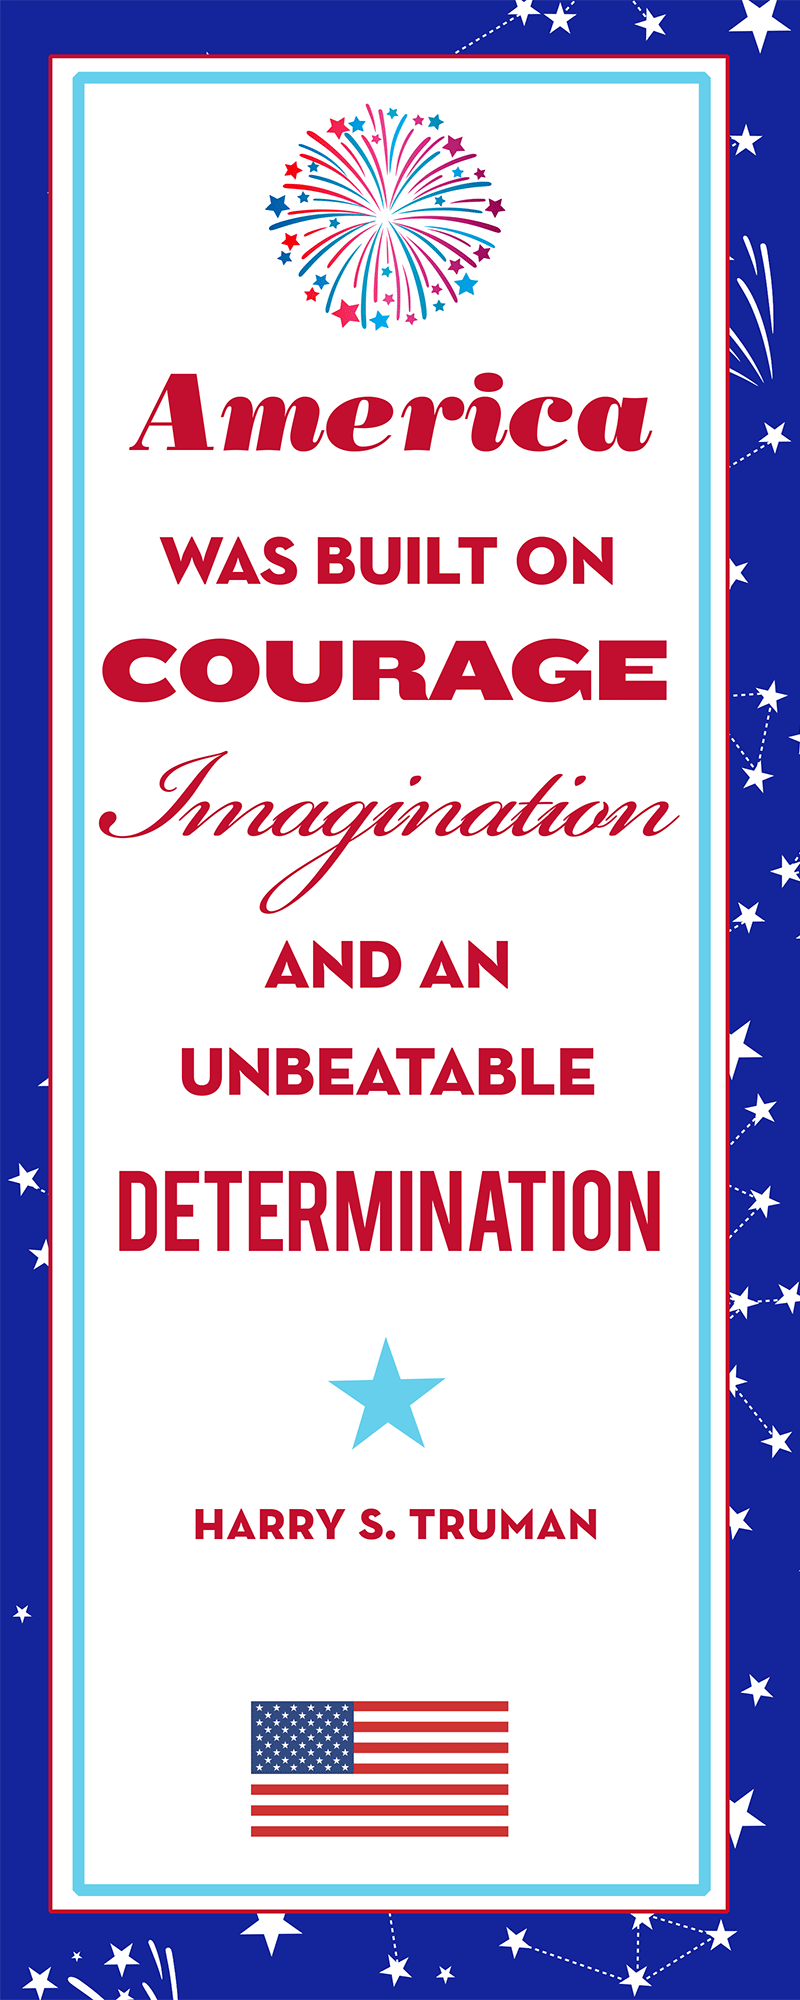 America was built on courage, imagination and an unbeatable determination. Harry S. Truman